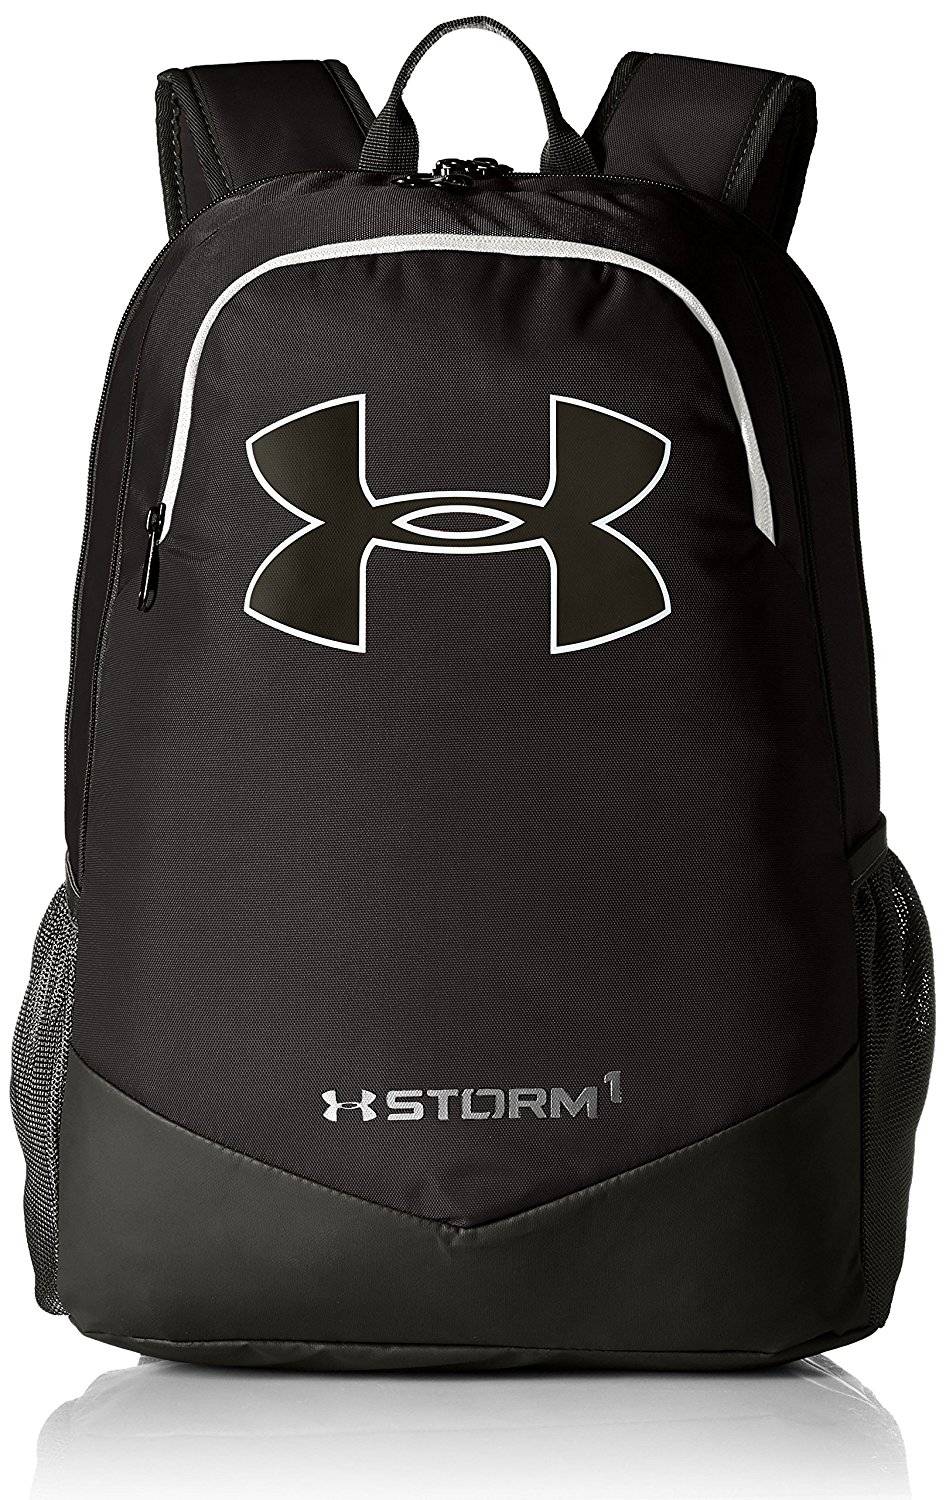 Under Armour Boys Storm Sports Scrimmage Backpack